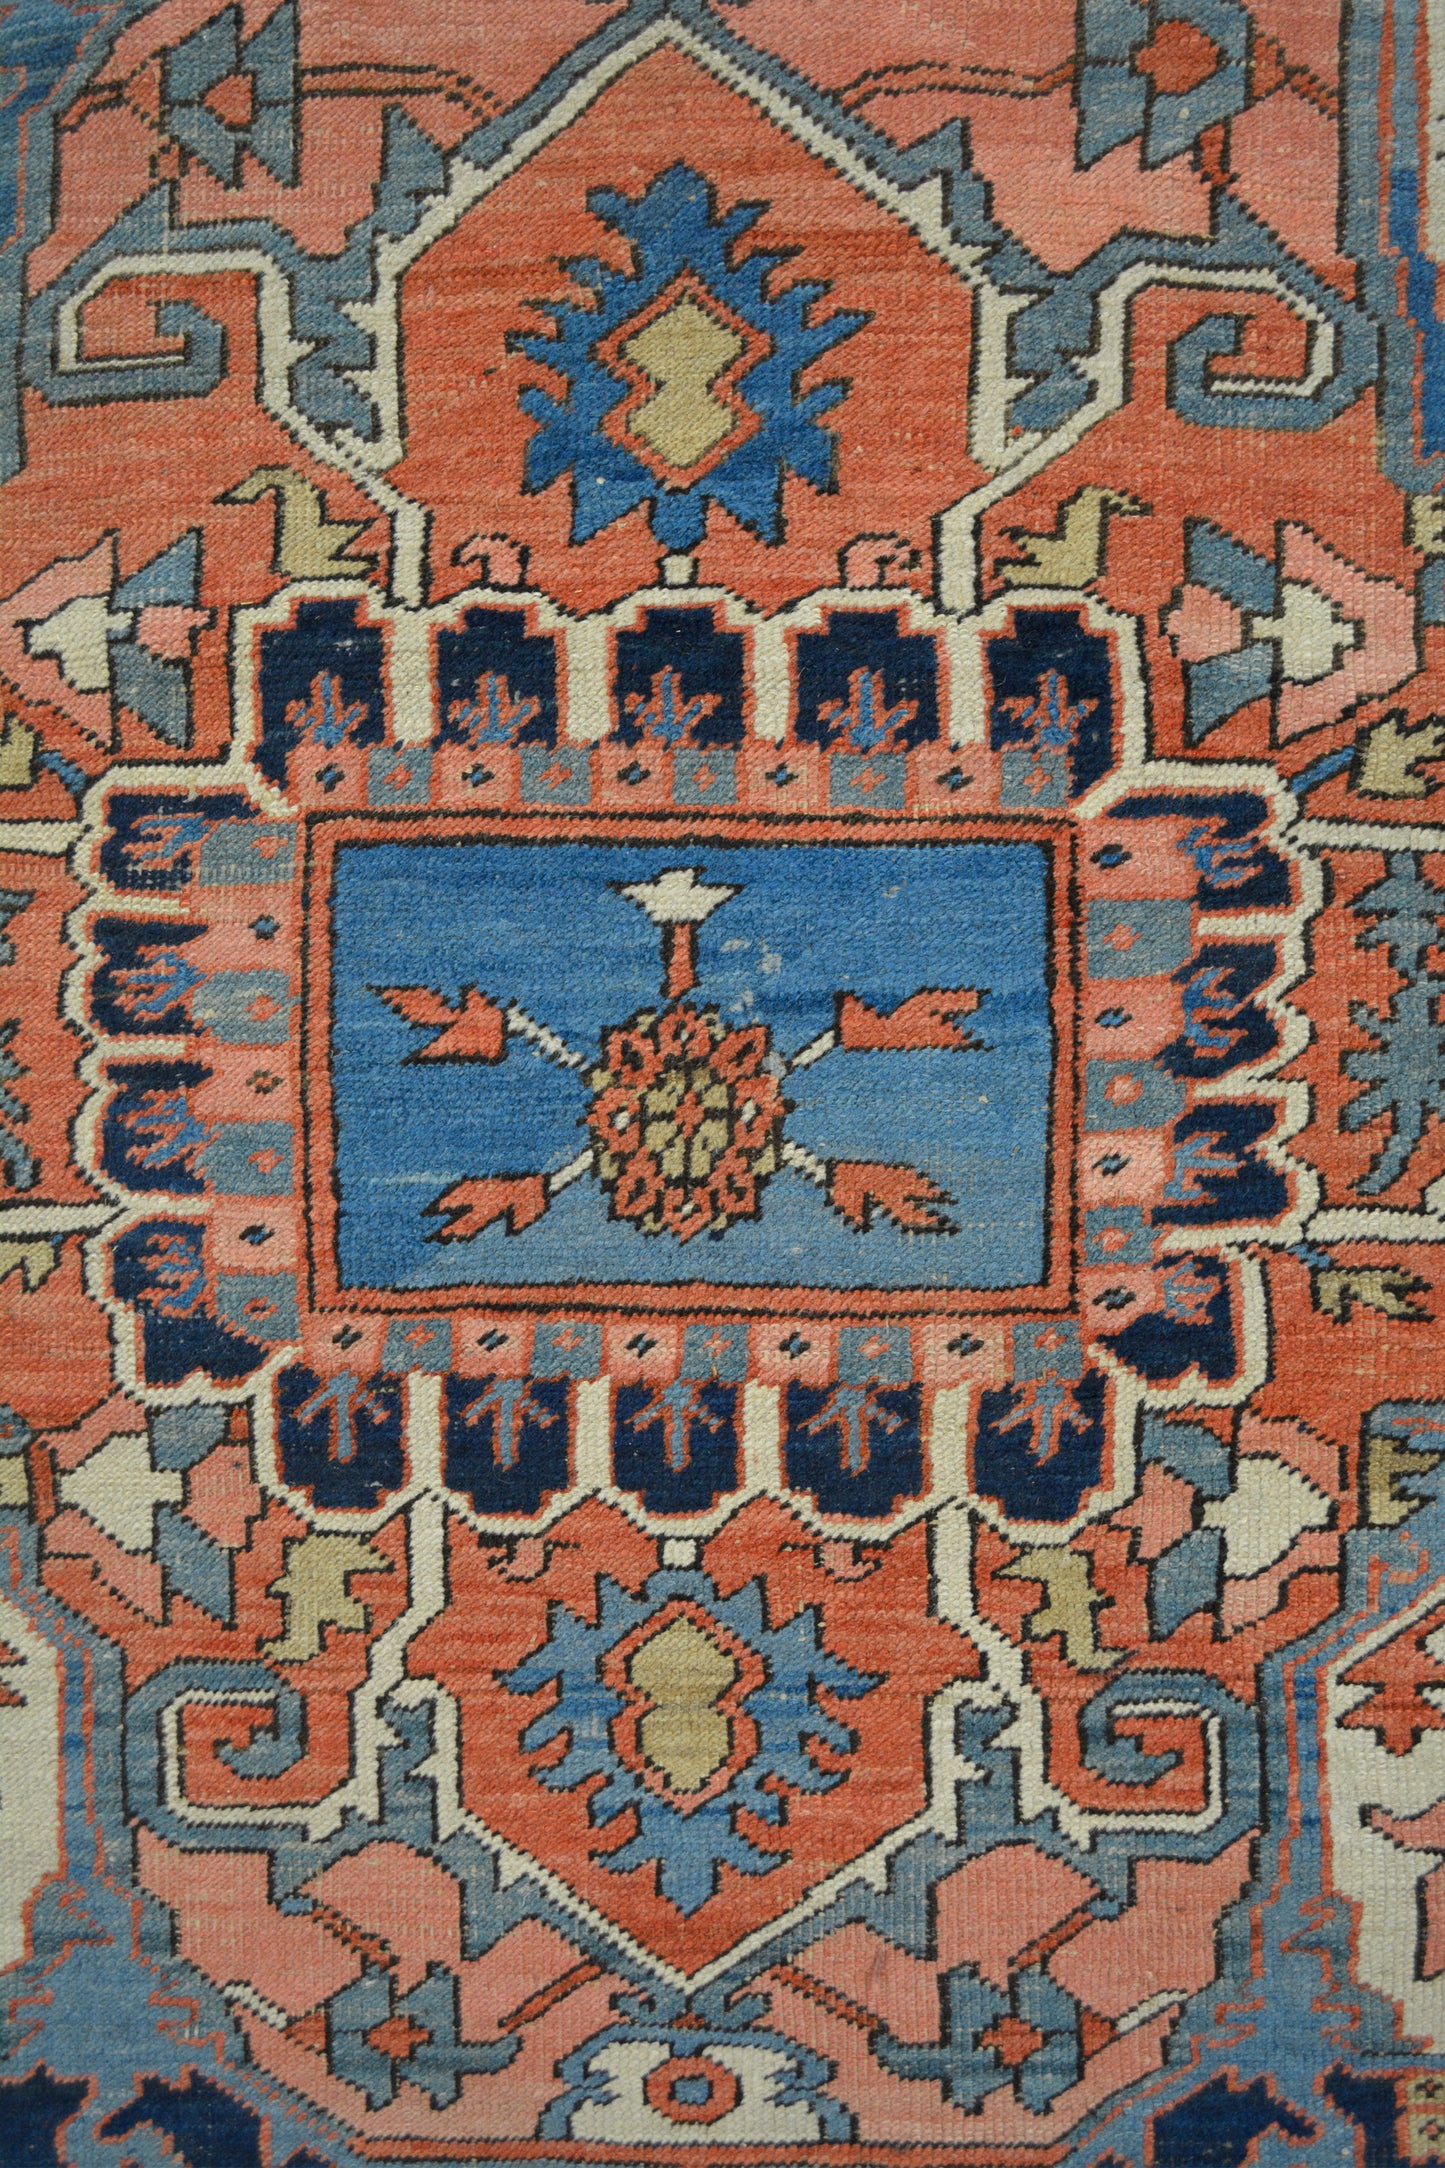 The rug's close-up shows a small design with five arrows pointing to the center over blue background to create contrast.